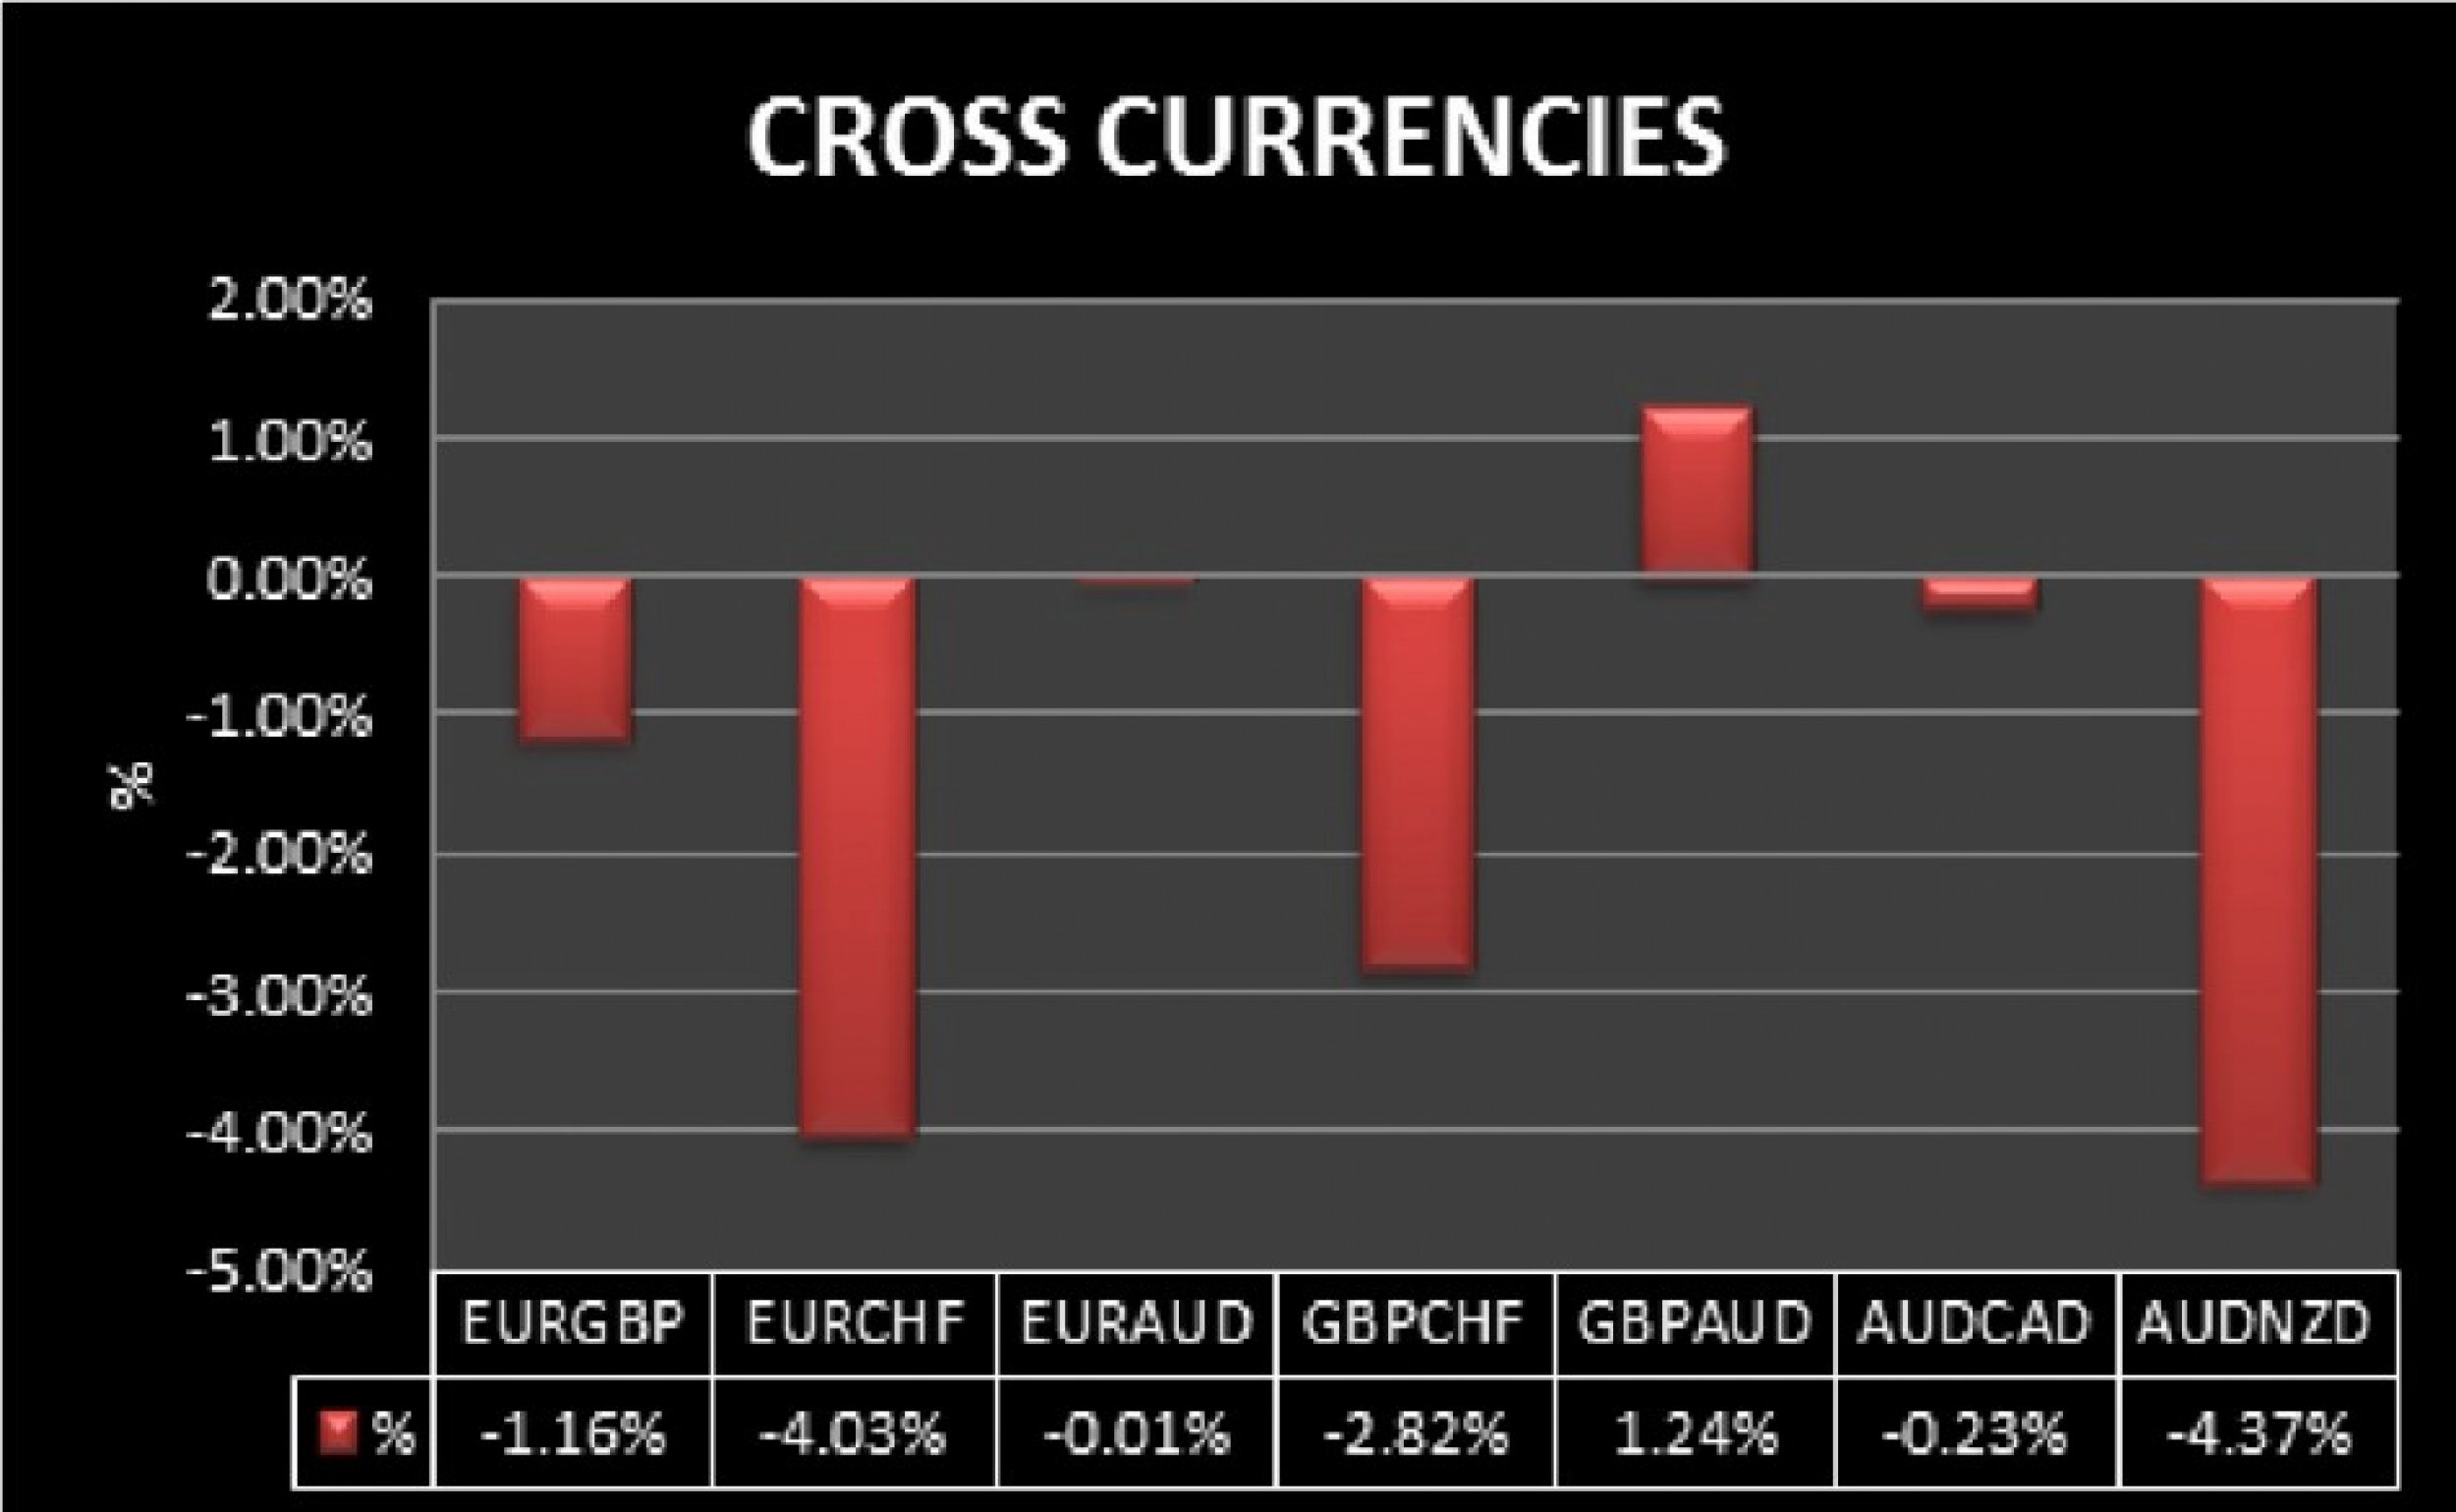 Cross Currencies - Month of May